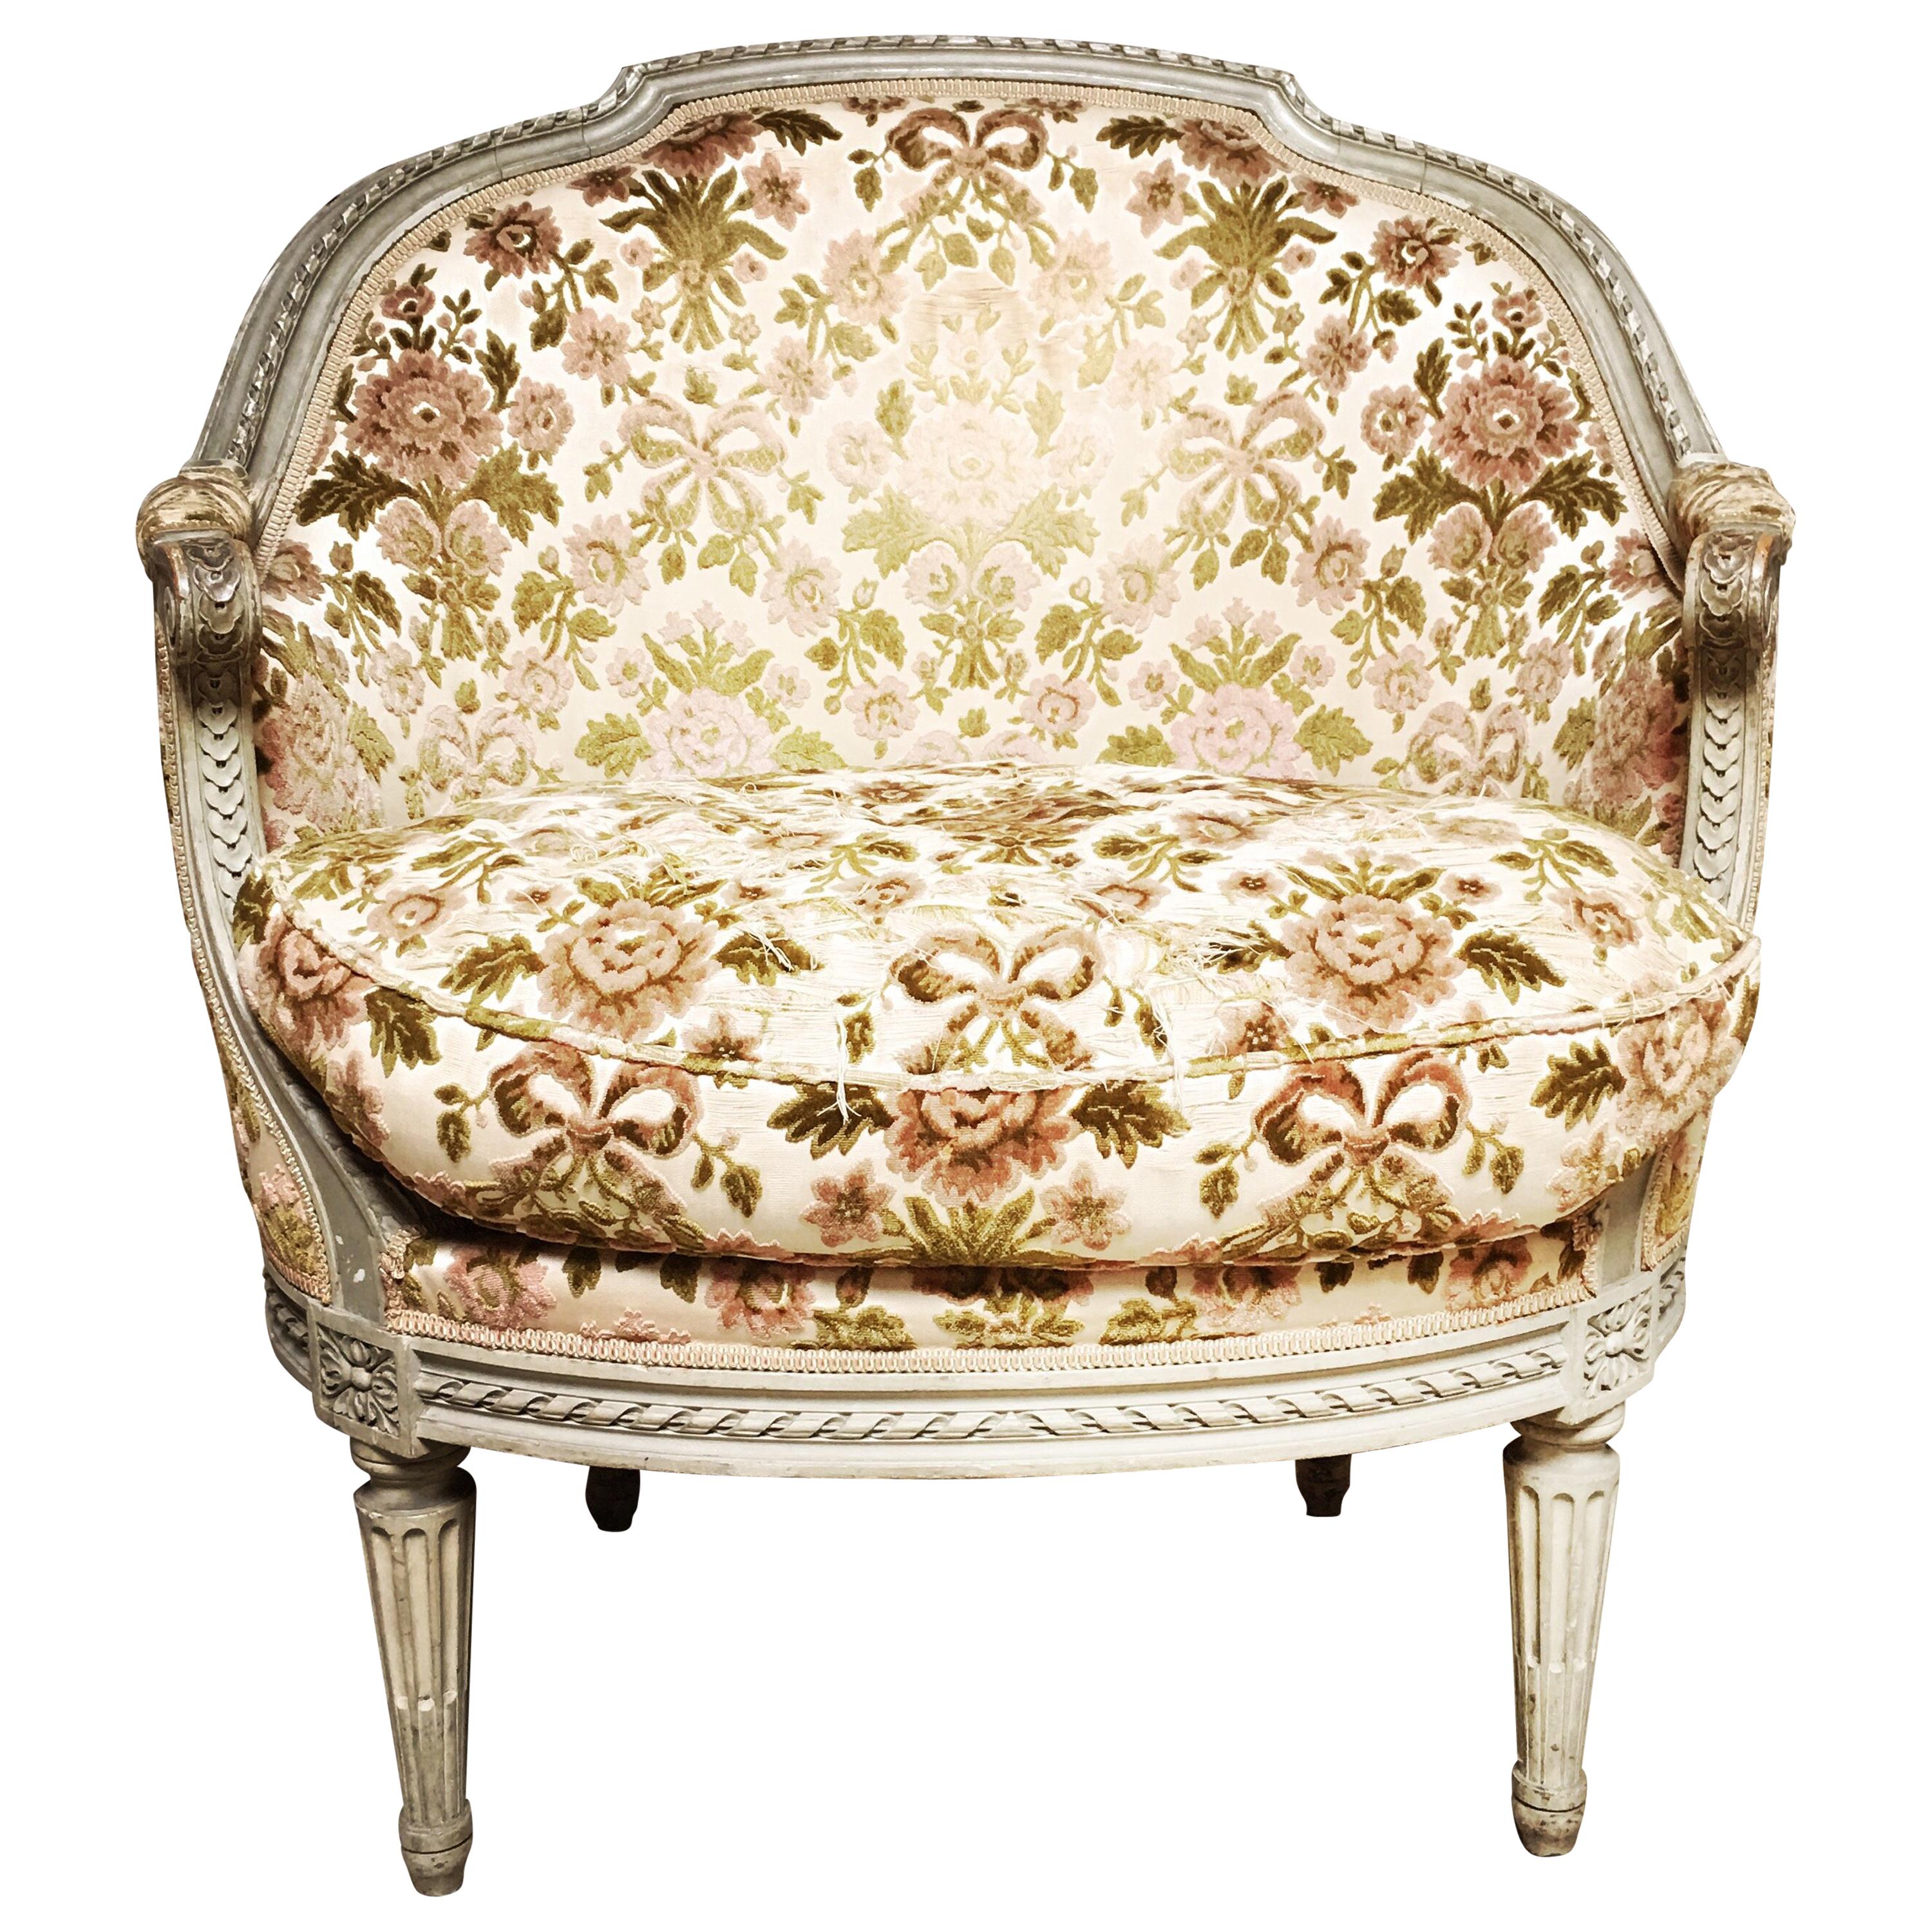 French Louis XVI Style Marquise in a Painted Finish